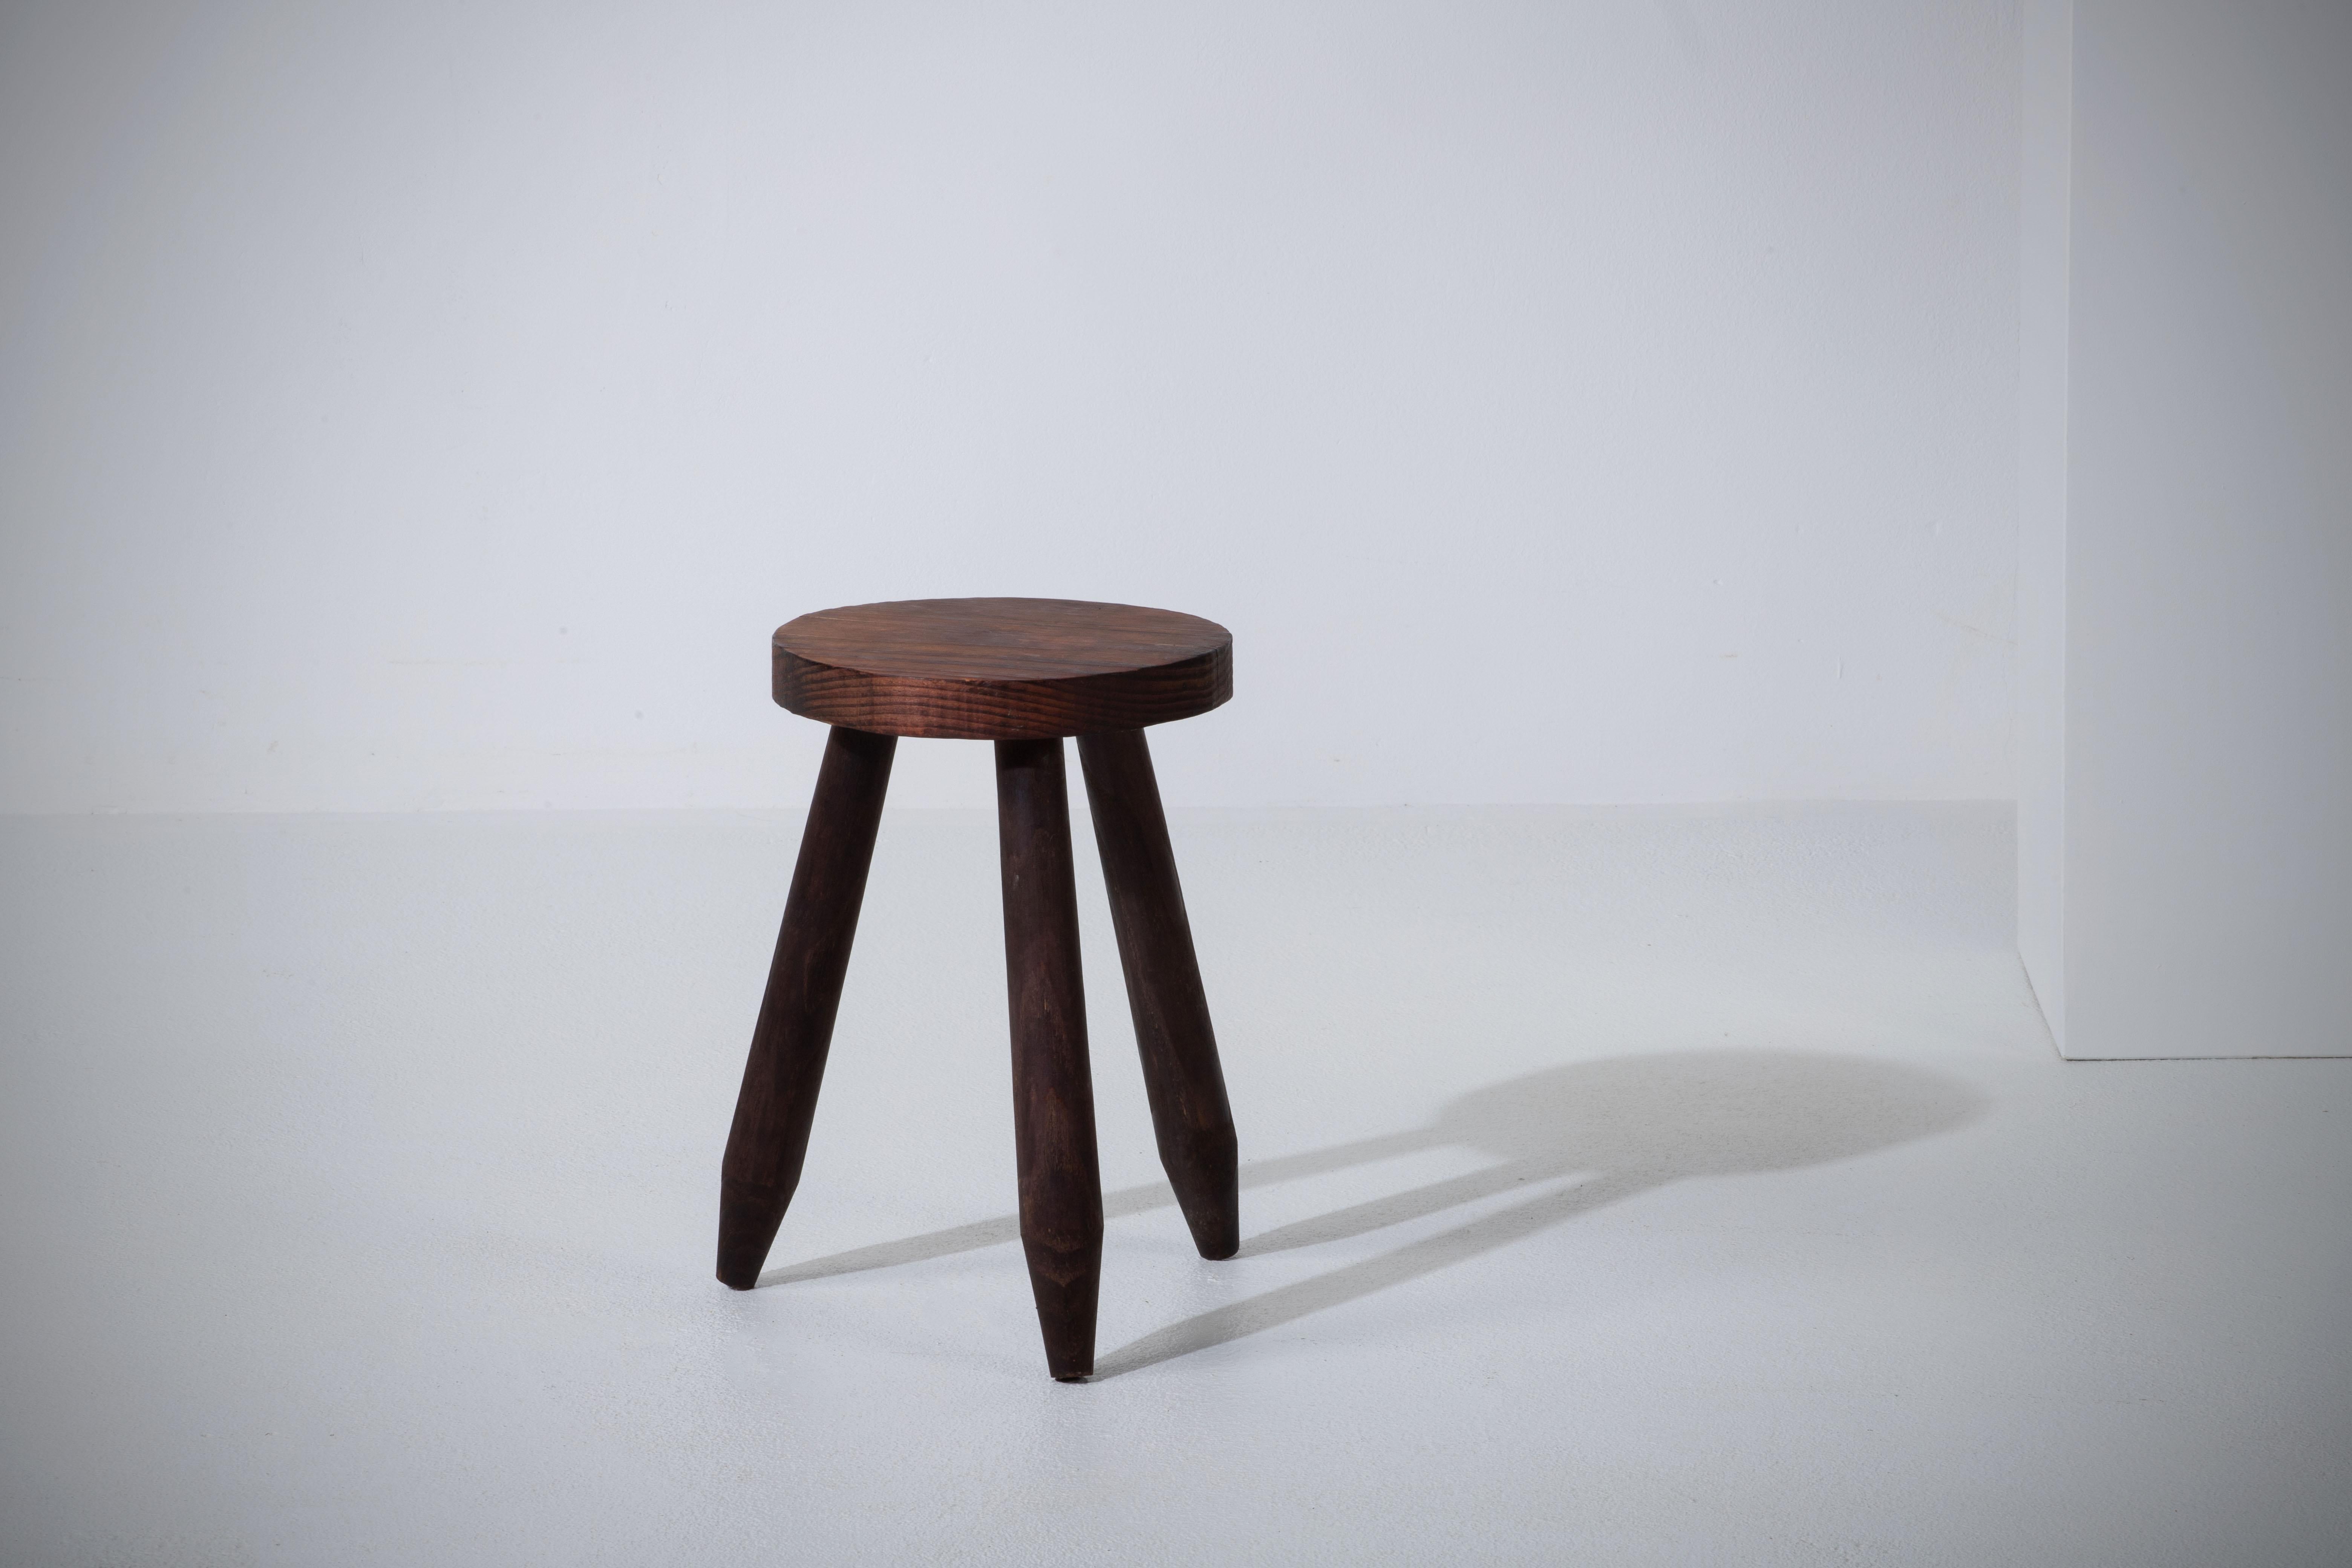 Fantastic wood stool from France in the style of Charlotte Perriand. Made in the 1960s with three legs. No hardware. Good vintage condition.